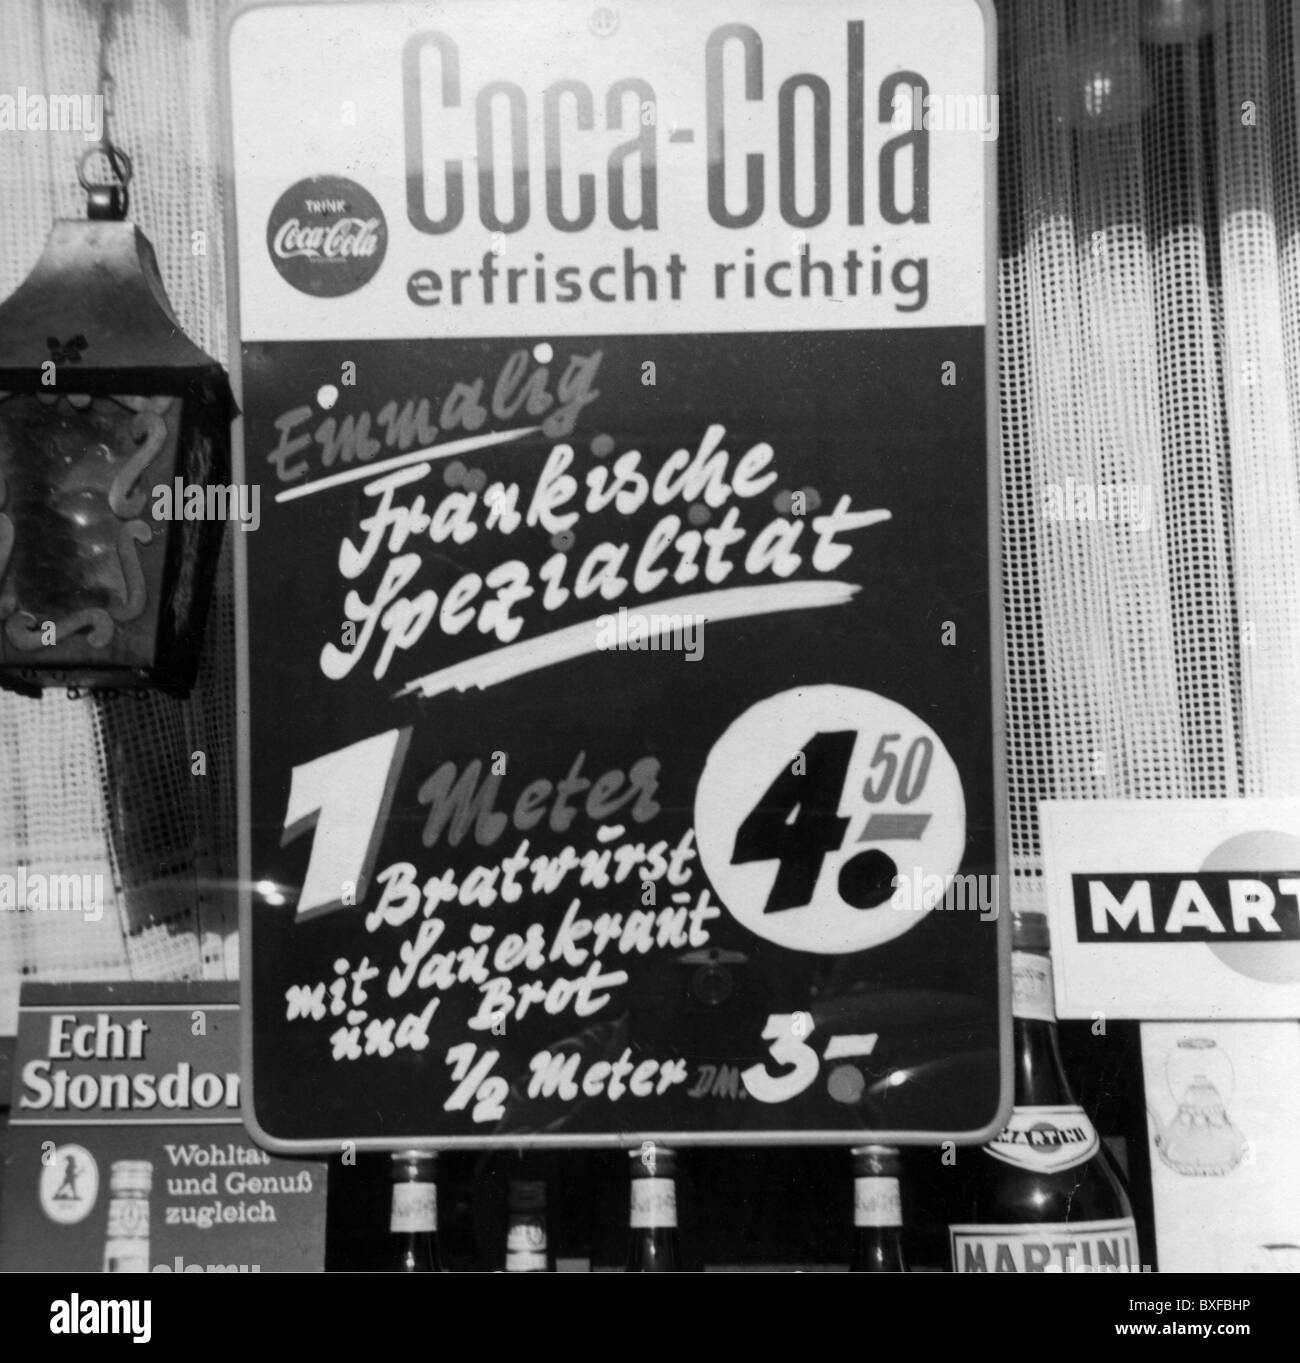 advertising, beverages, coke, Coca Cola advertising sign in a shop window, Germany, 1960s, Additional-Rights-Clearences-Not Available Stock Photo